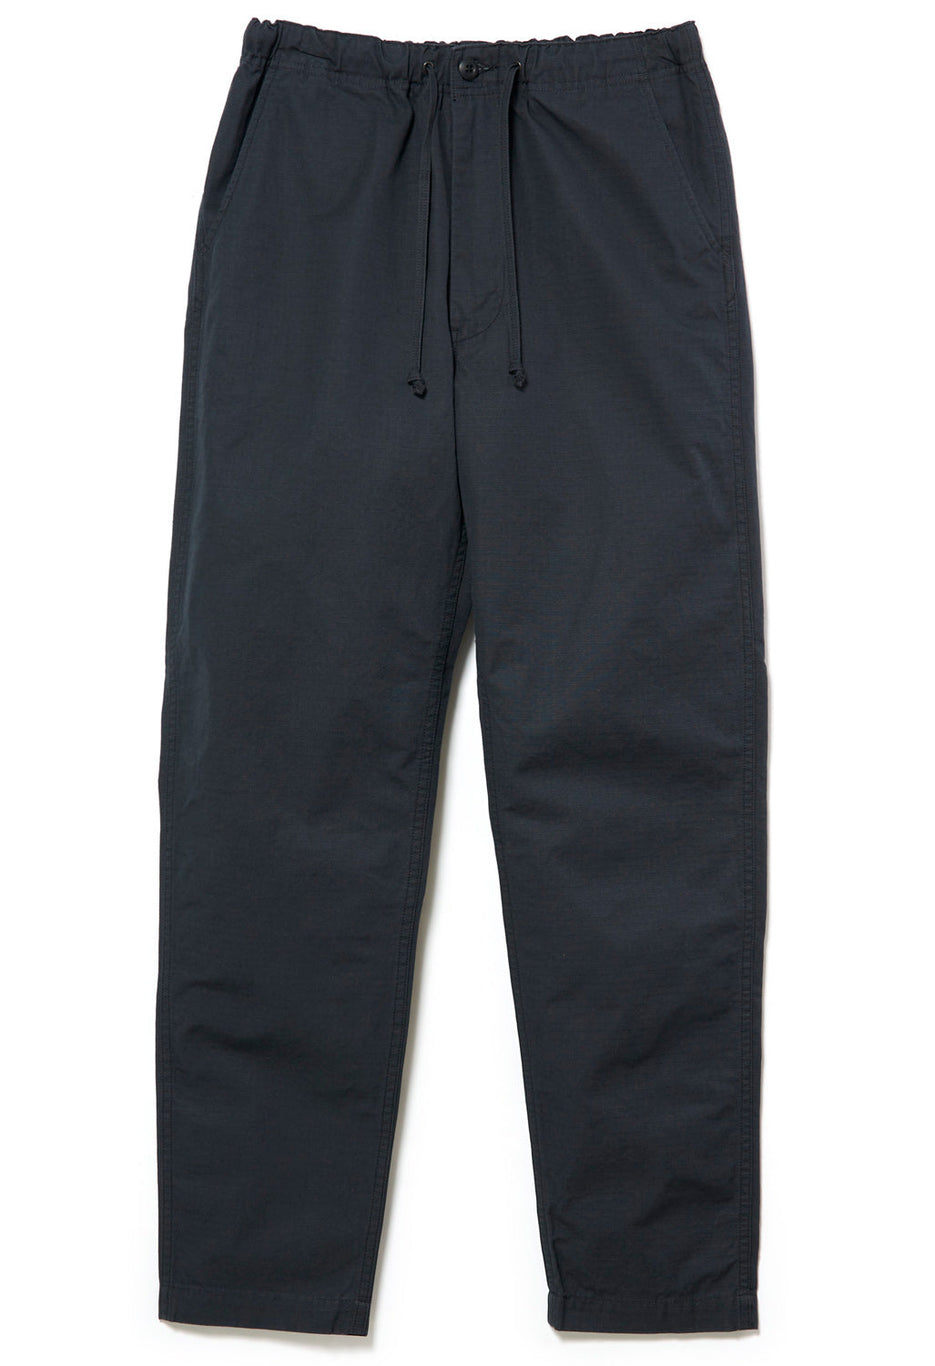 orSlow New Yorker Pants 14